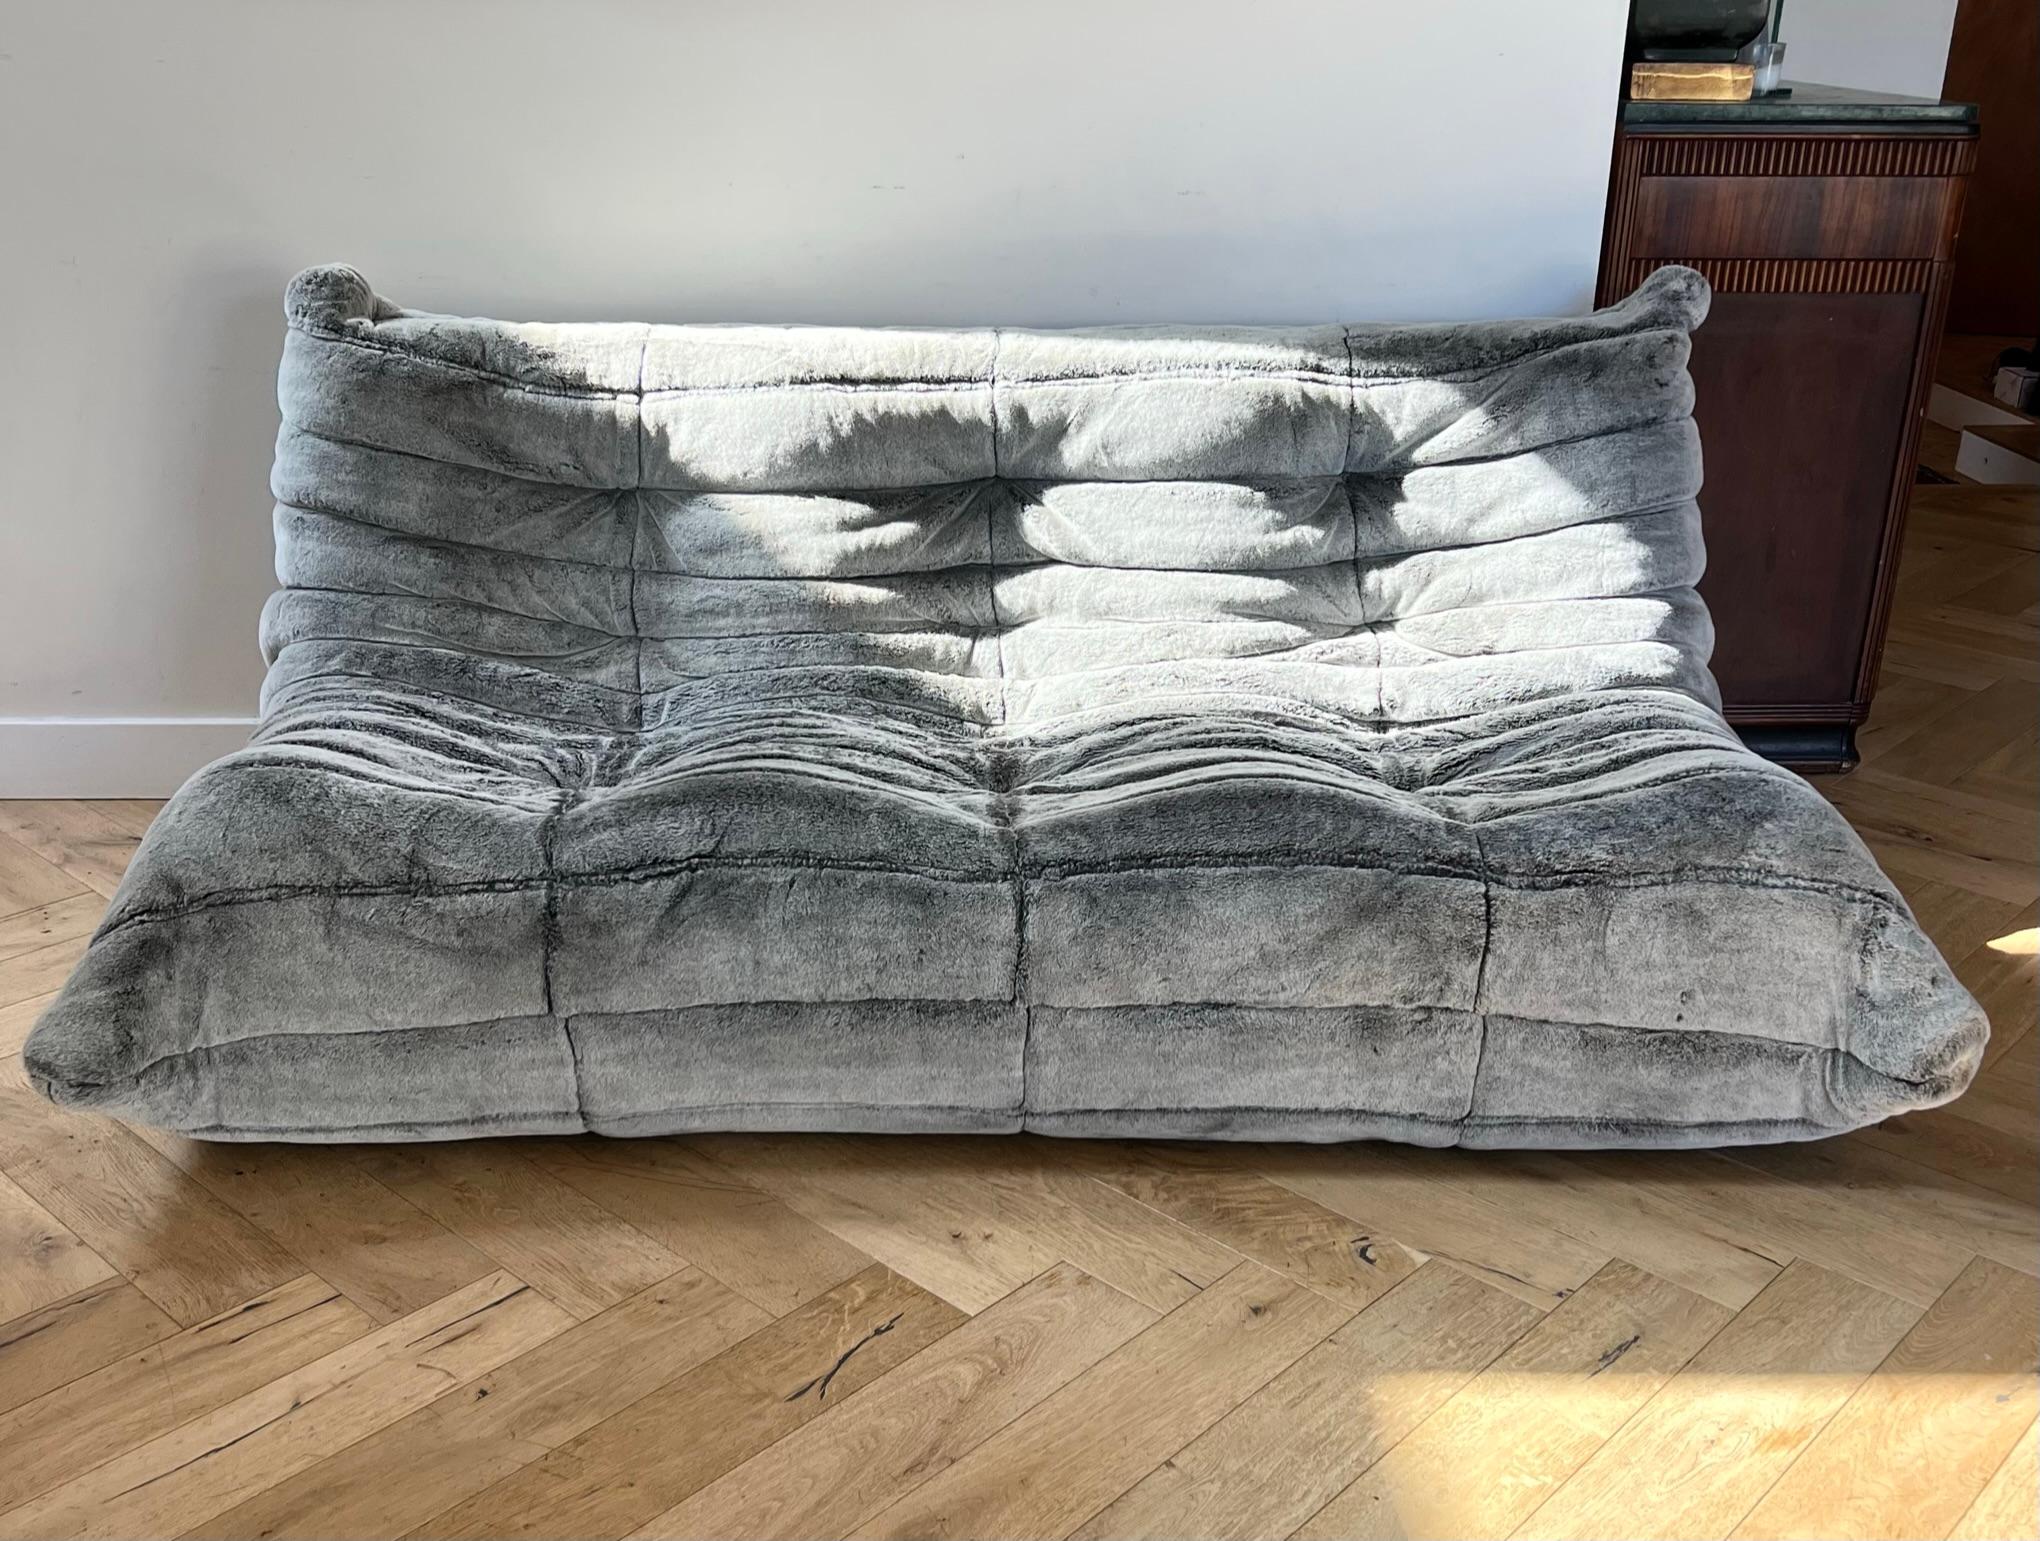 A Togo sofa by Michel Ducaroy for Ligne Roset. A fine reproduction of the 1970s original in warm gray faux mohair. Purchased from Ligne Roset, one previous owner, though the tag has been removed. Signs of age include some discoloration upon very